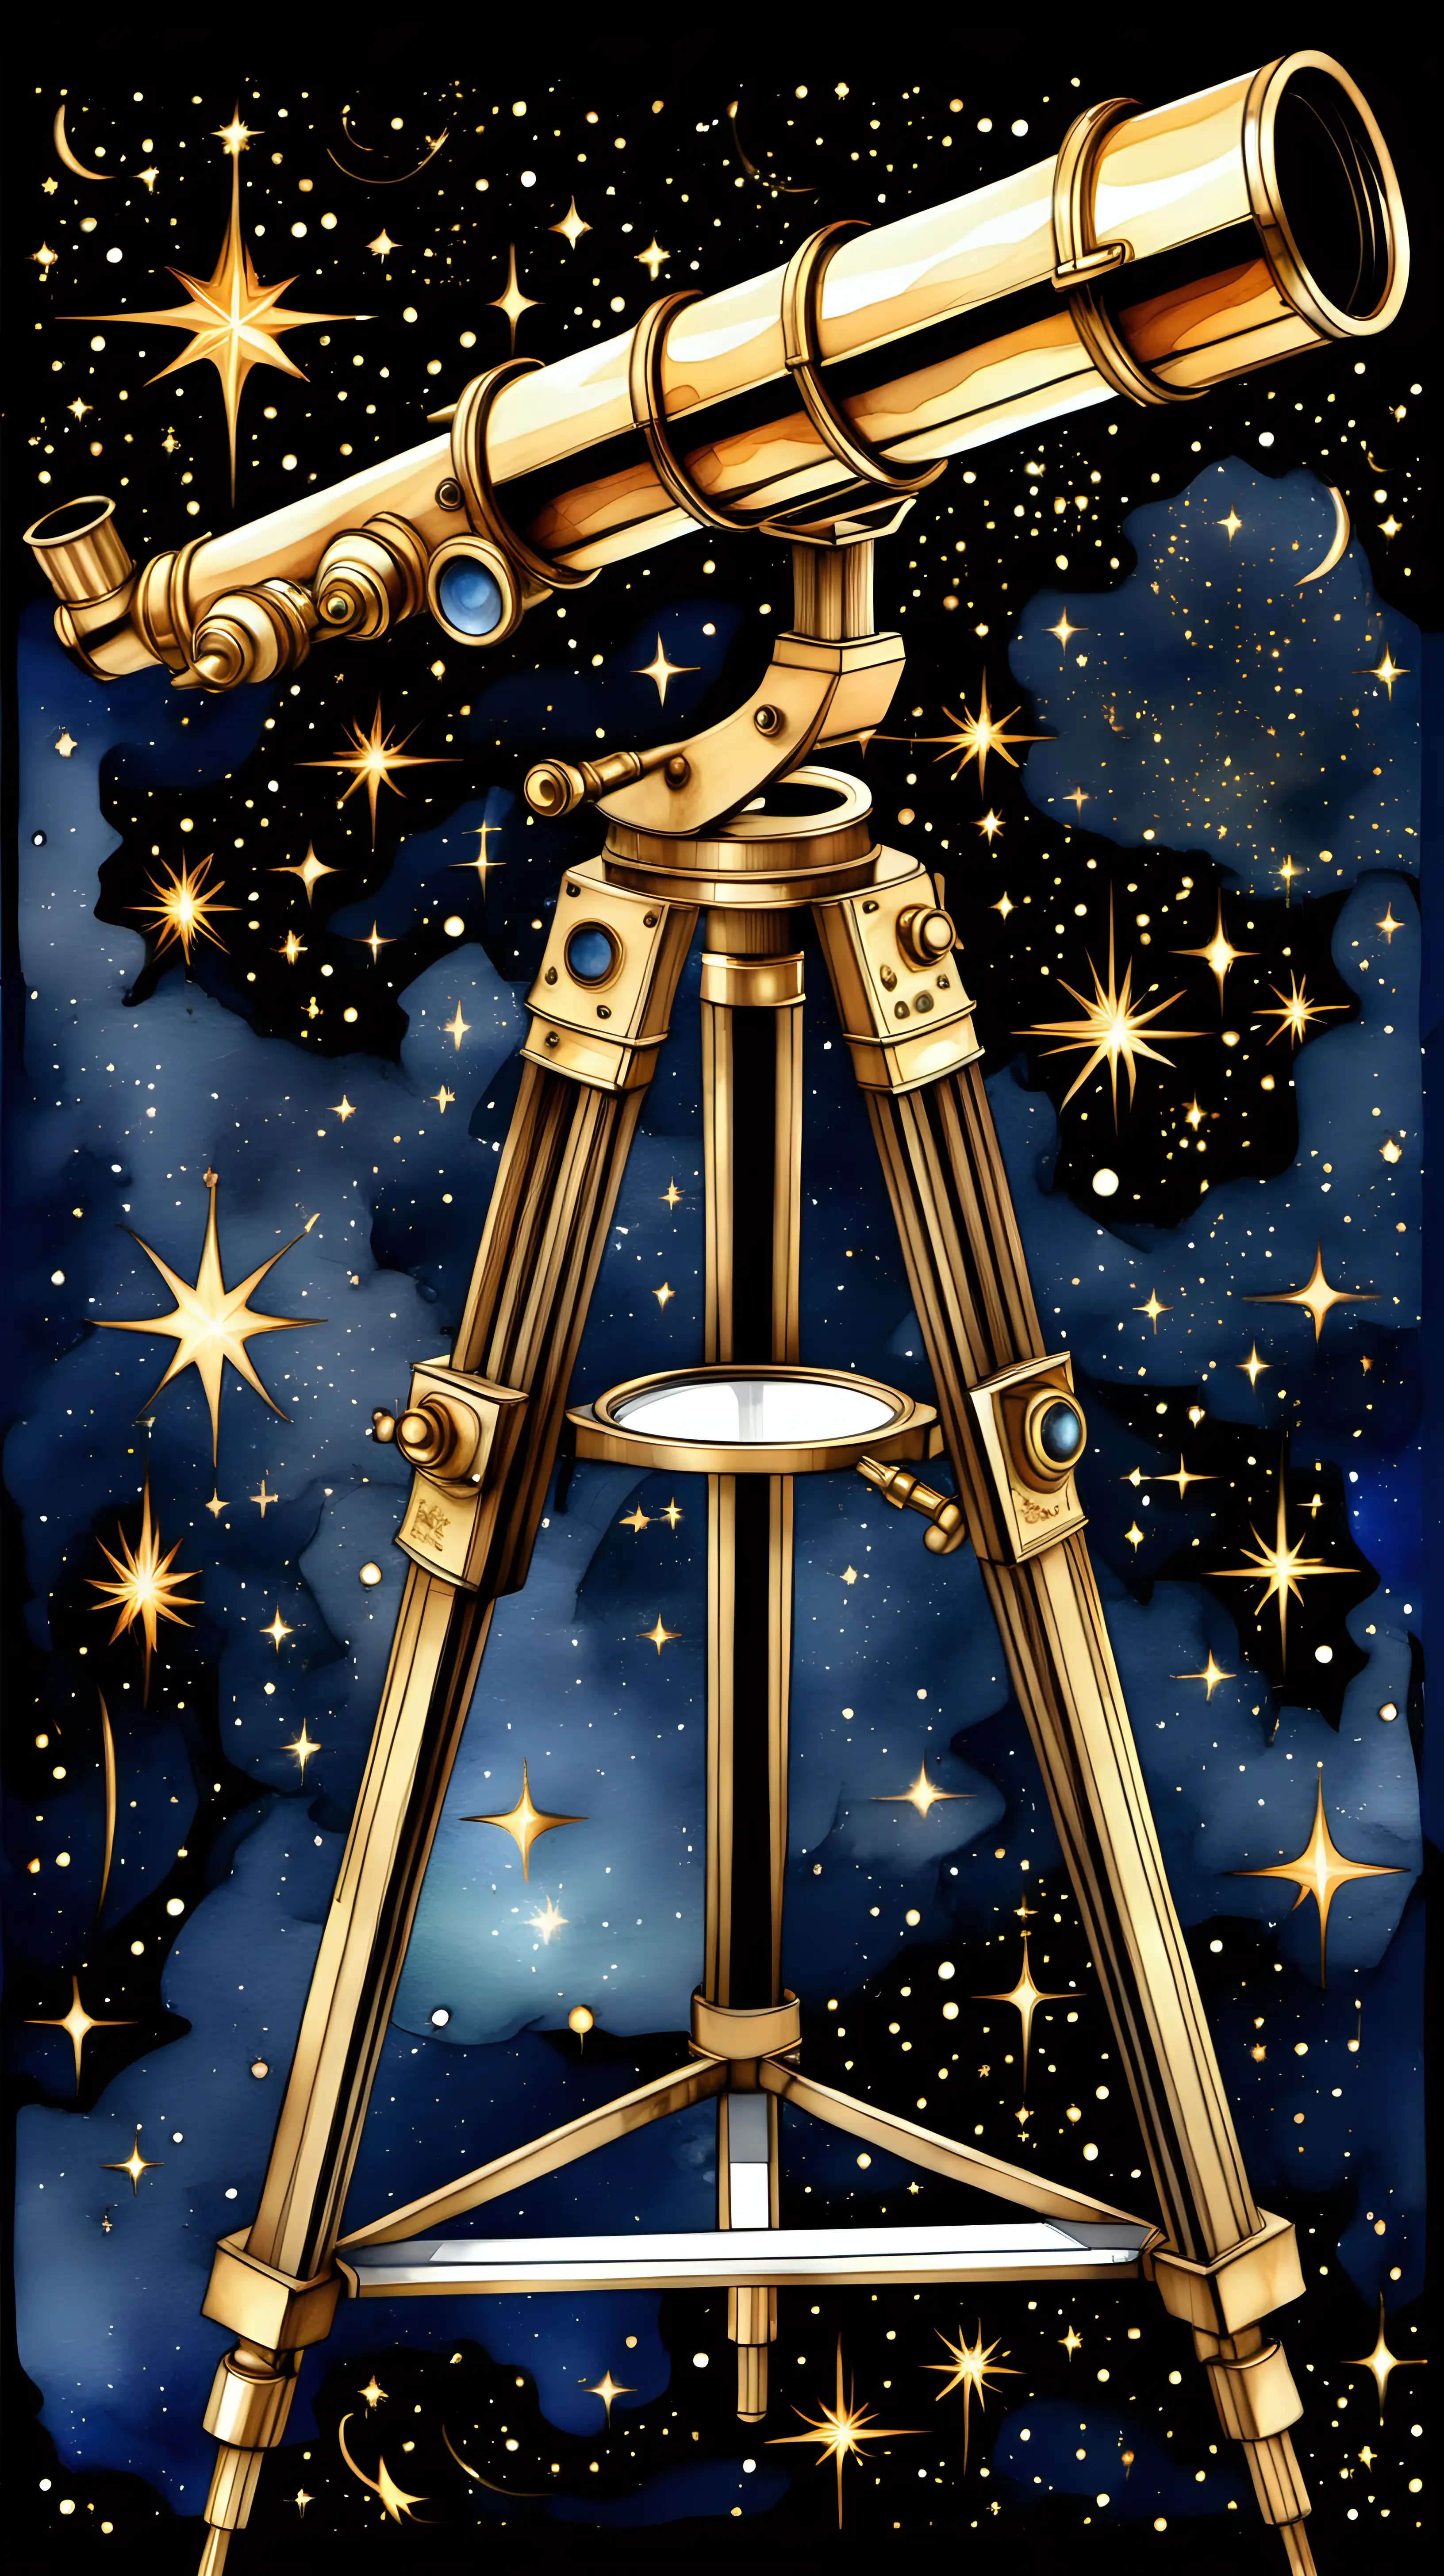 Exquisite Watercolor Painting of a Gold Telescope with Constellations